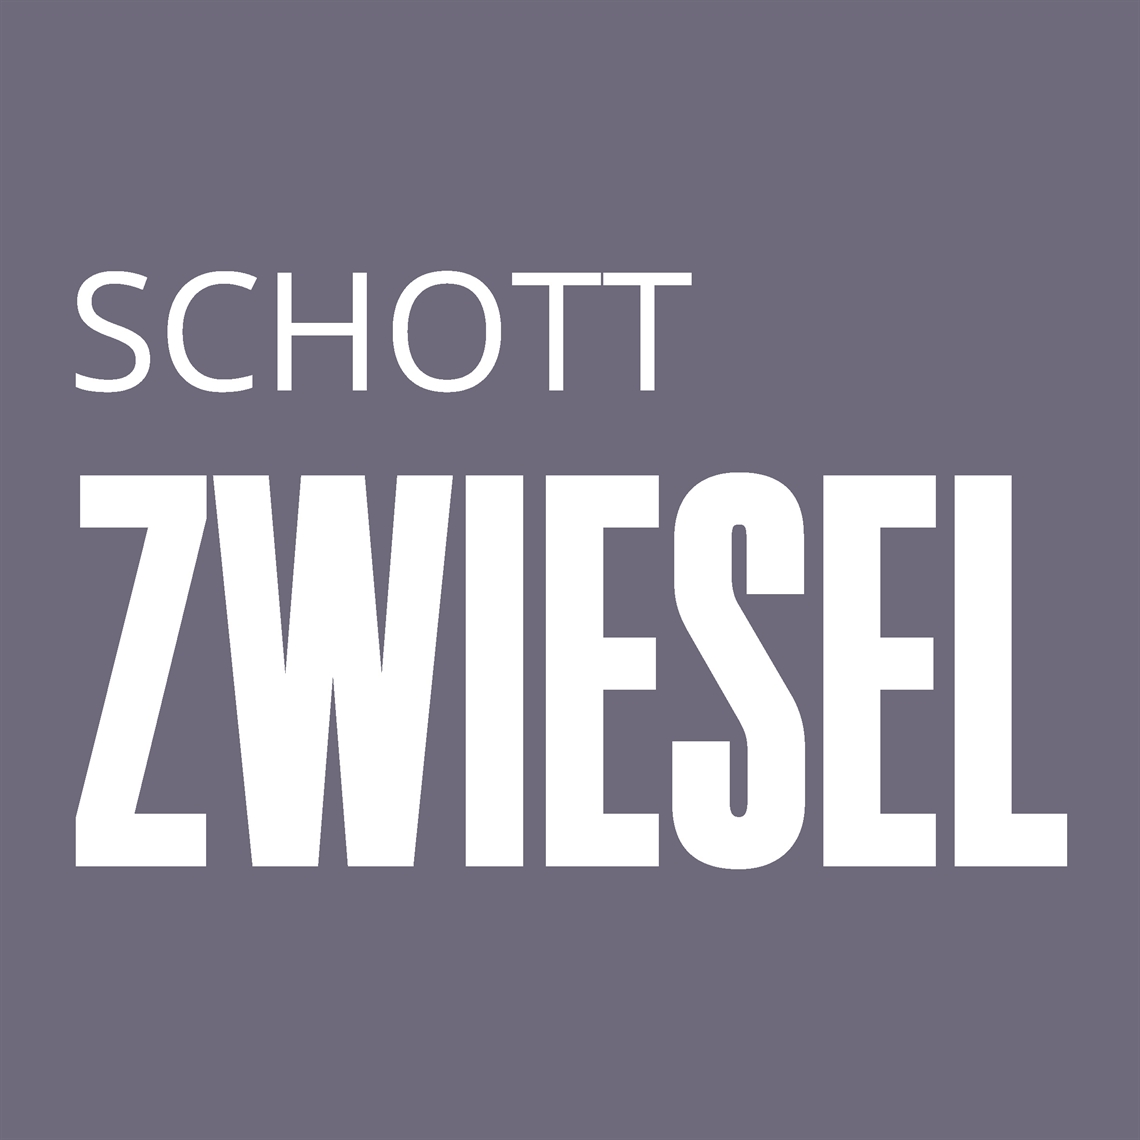 View our collection of Schott Zwiesel Spirit Glasses